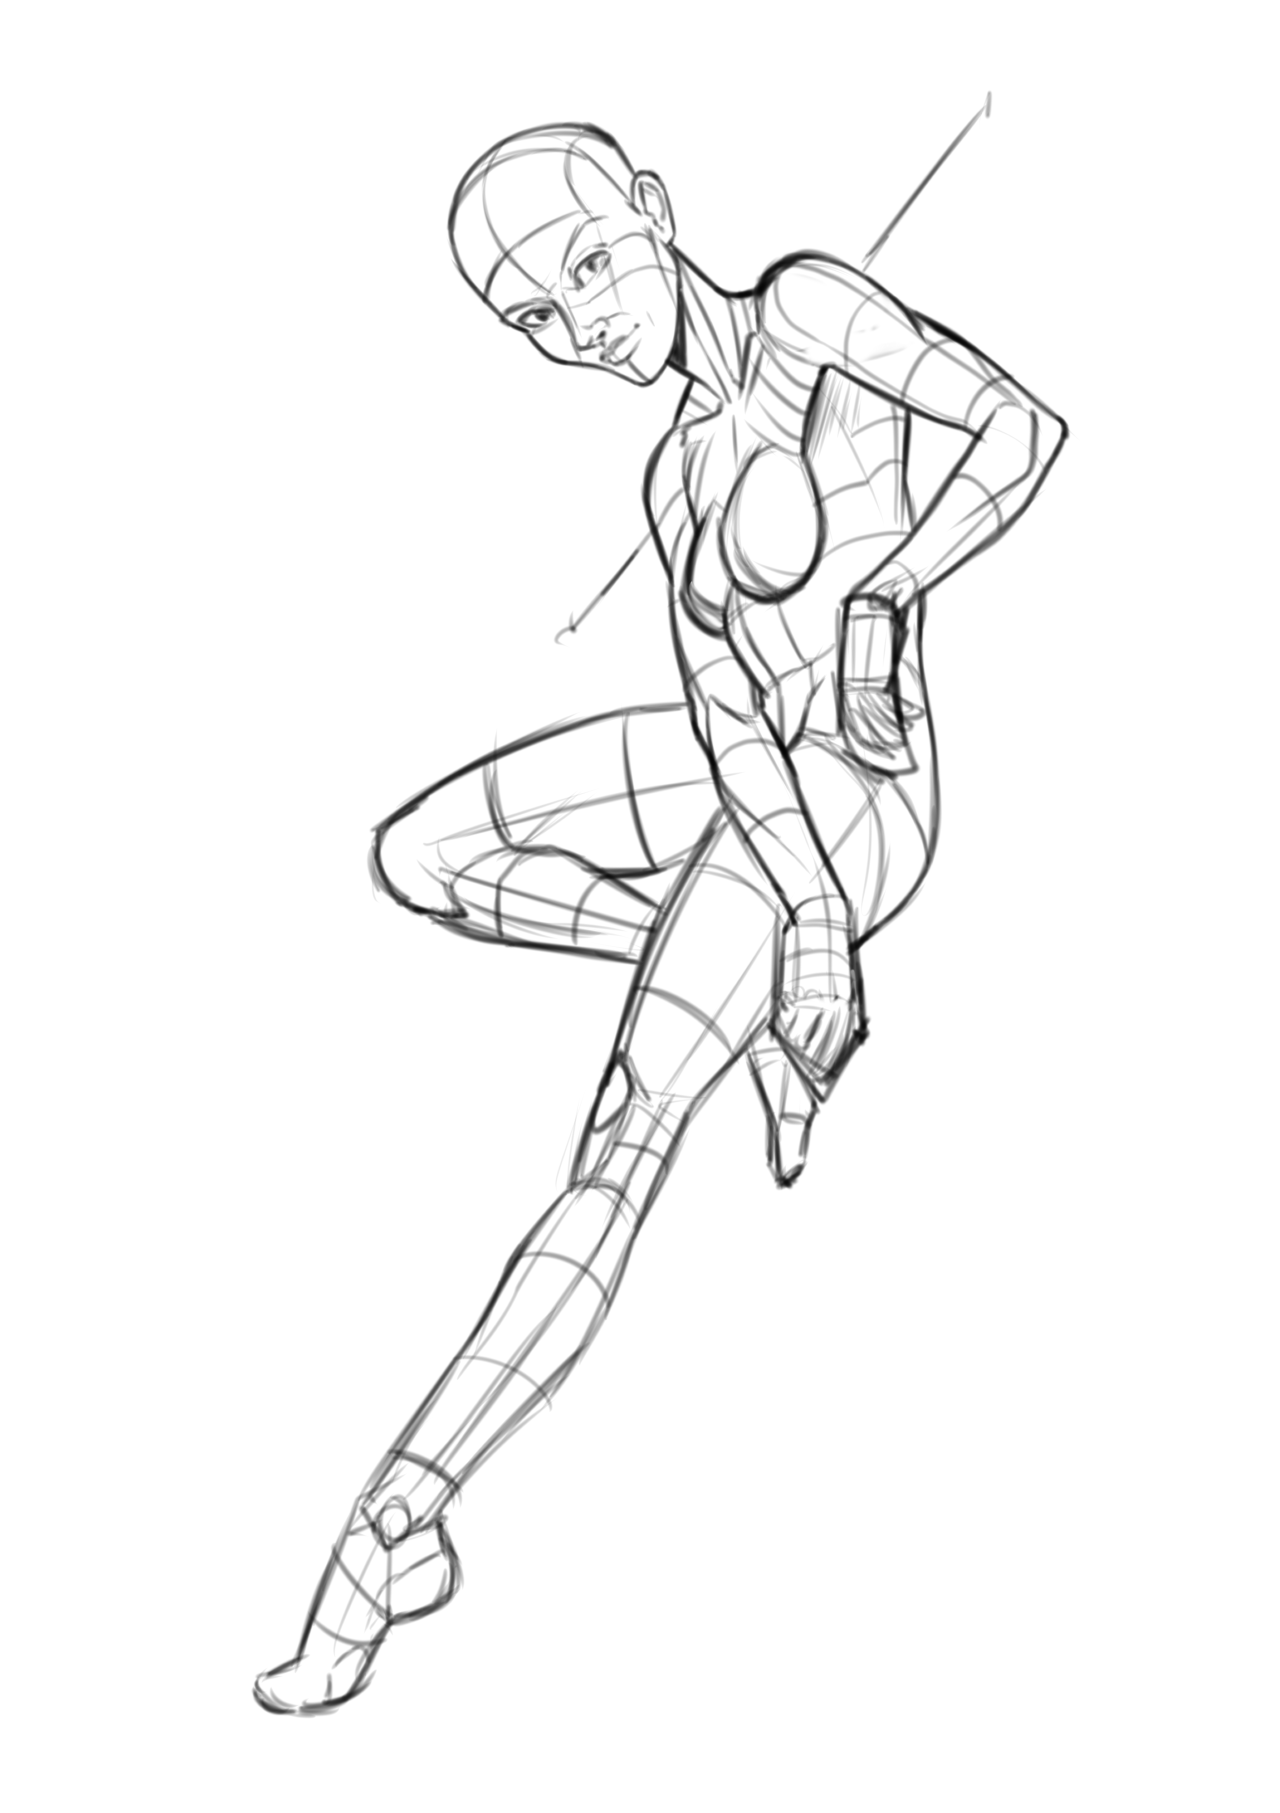 Pose Reference for Artists - My free pose references are on  https://www.posemuse.com/free-poses | Facebook